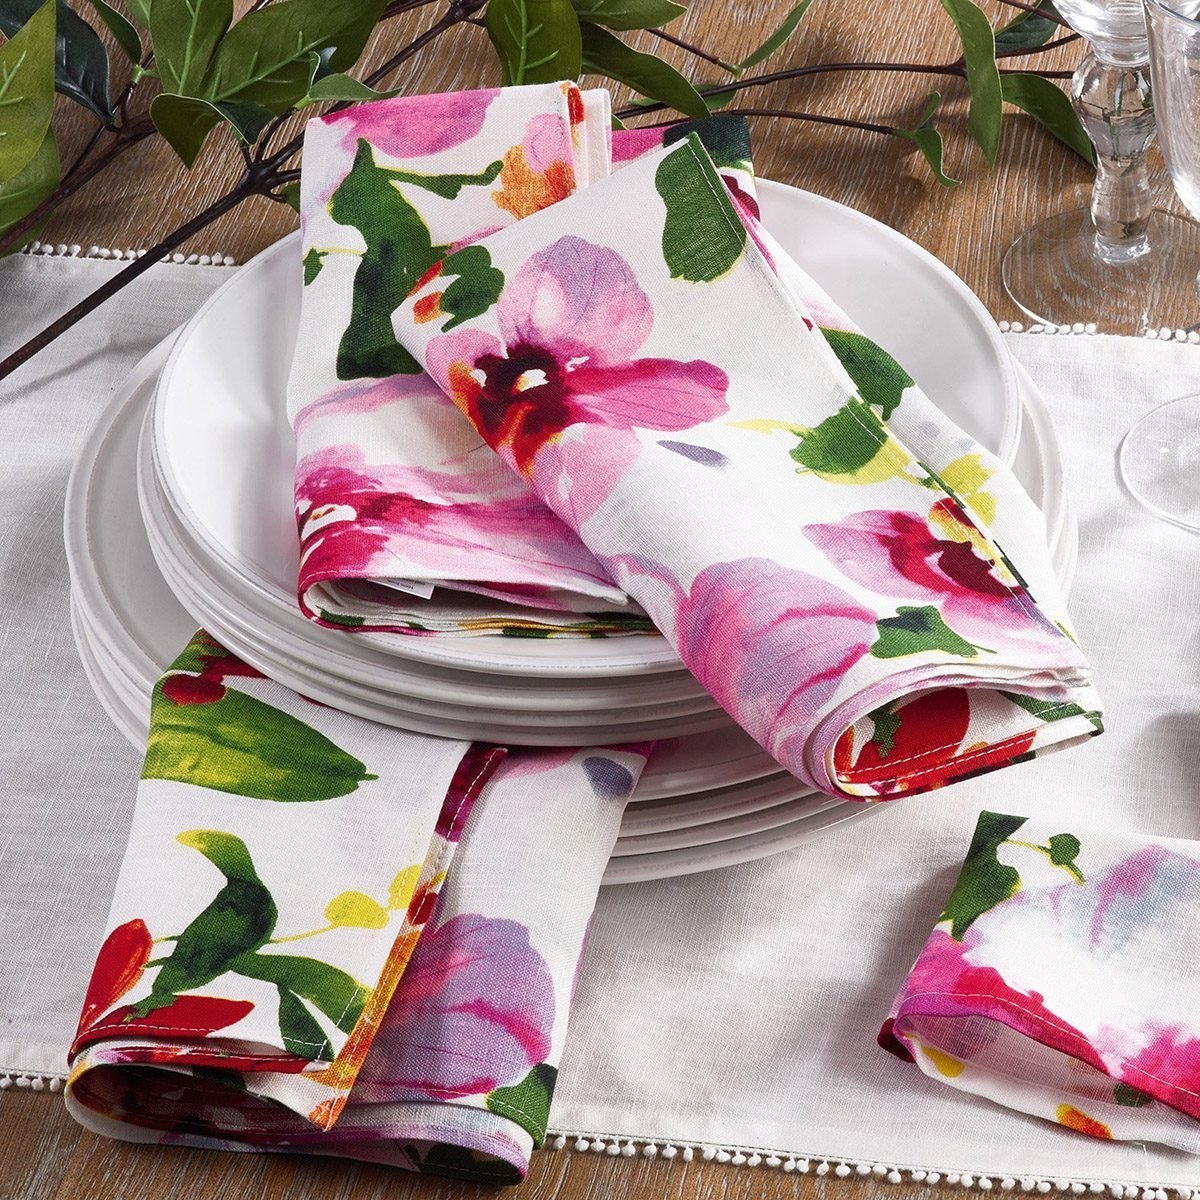 Where to Find Eco-Friendly Placemats, Tablecloths & Table Runners